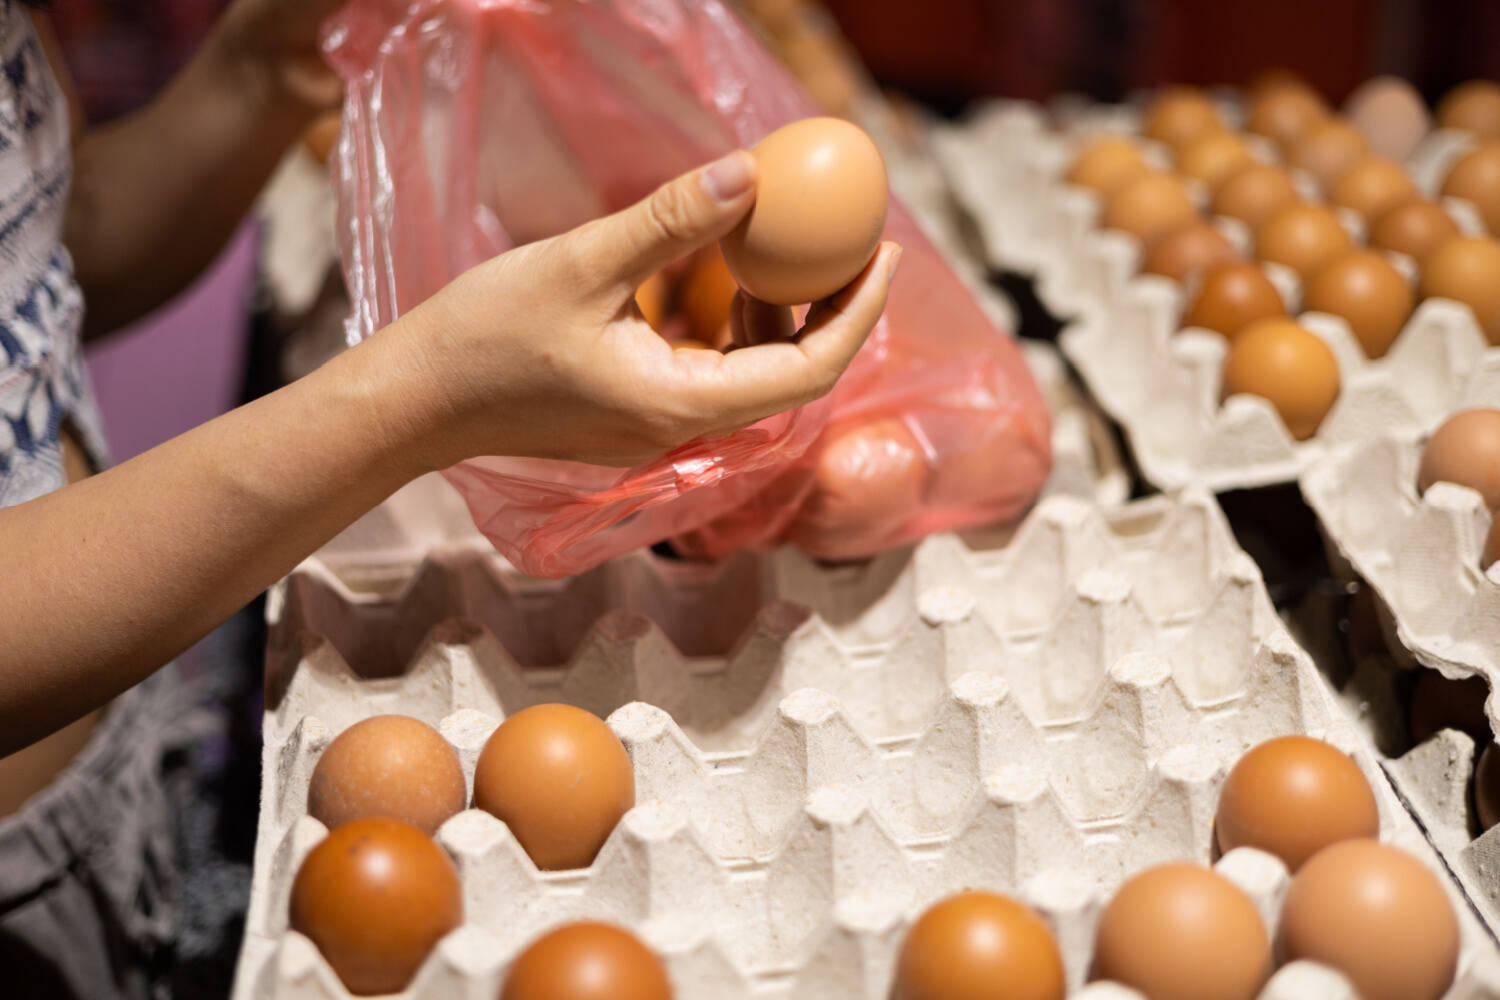 Selecting and storing eggs